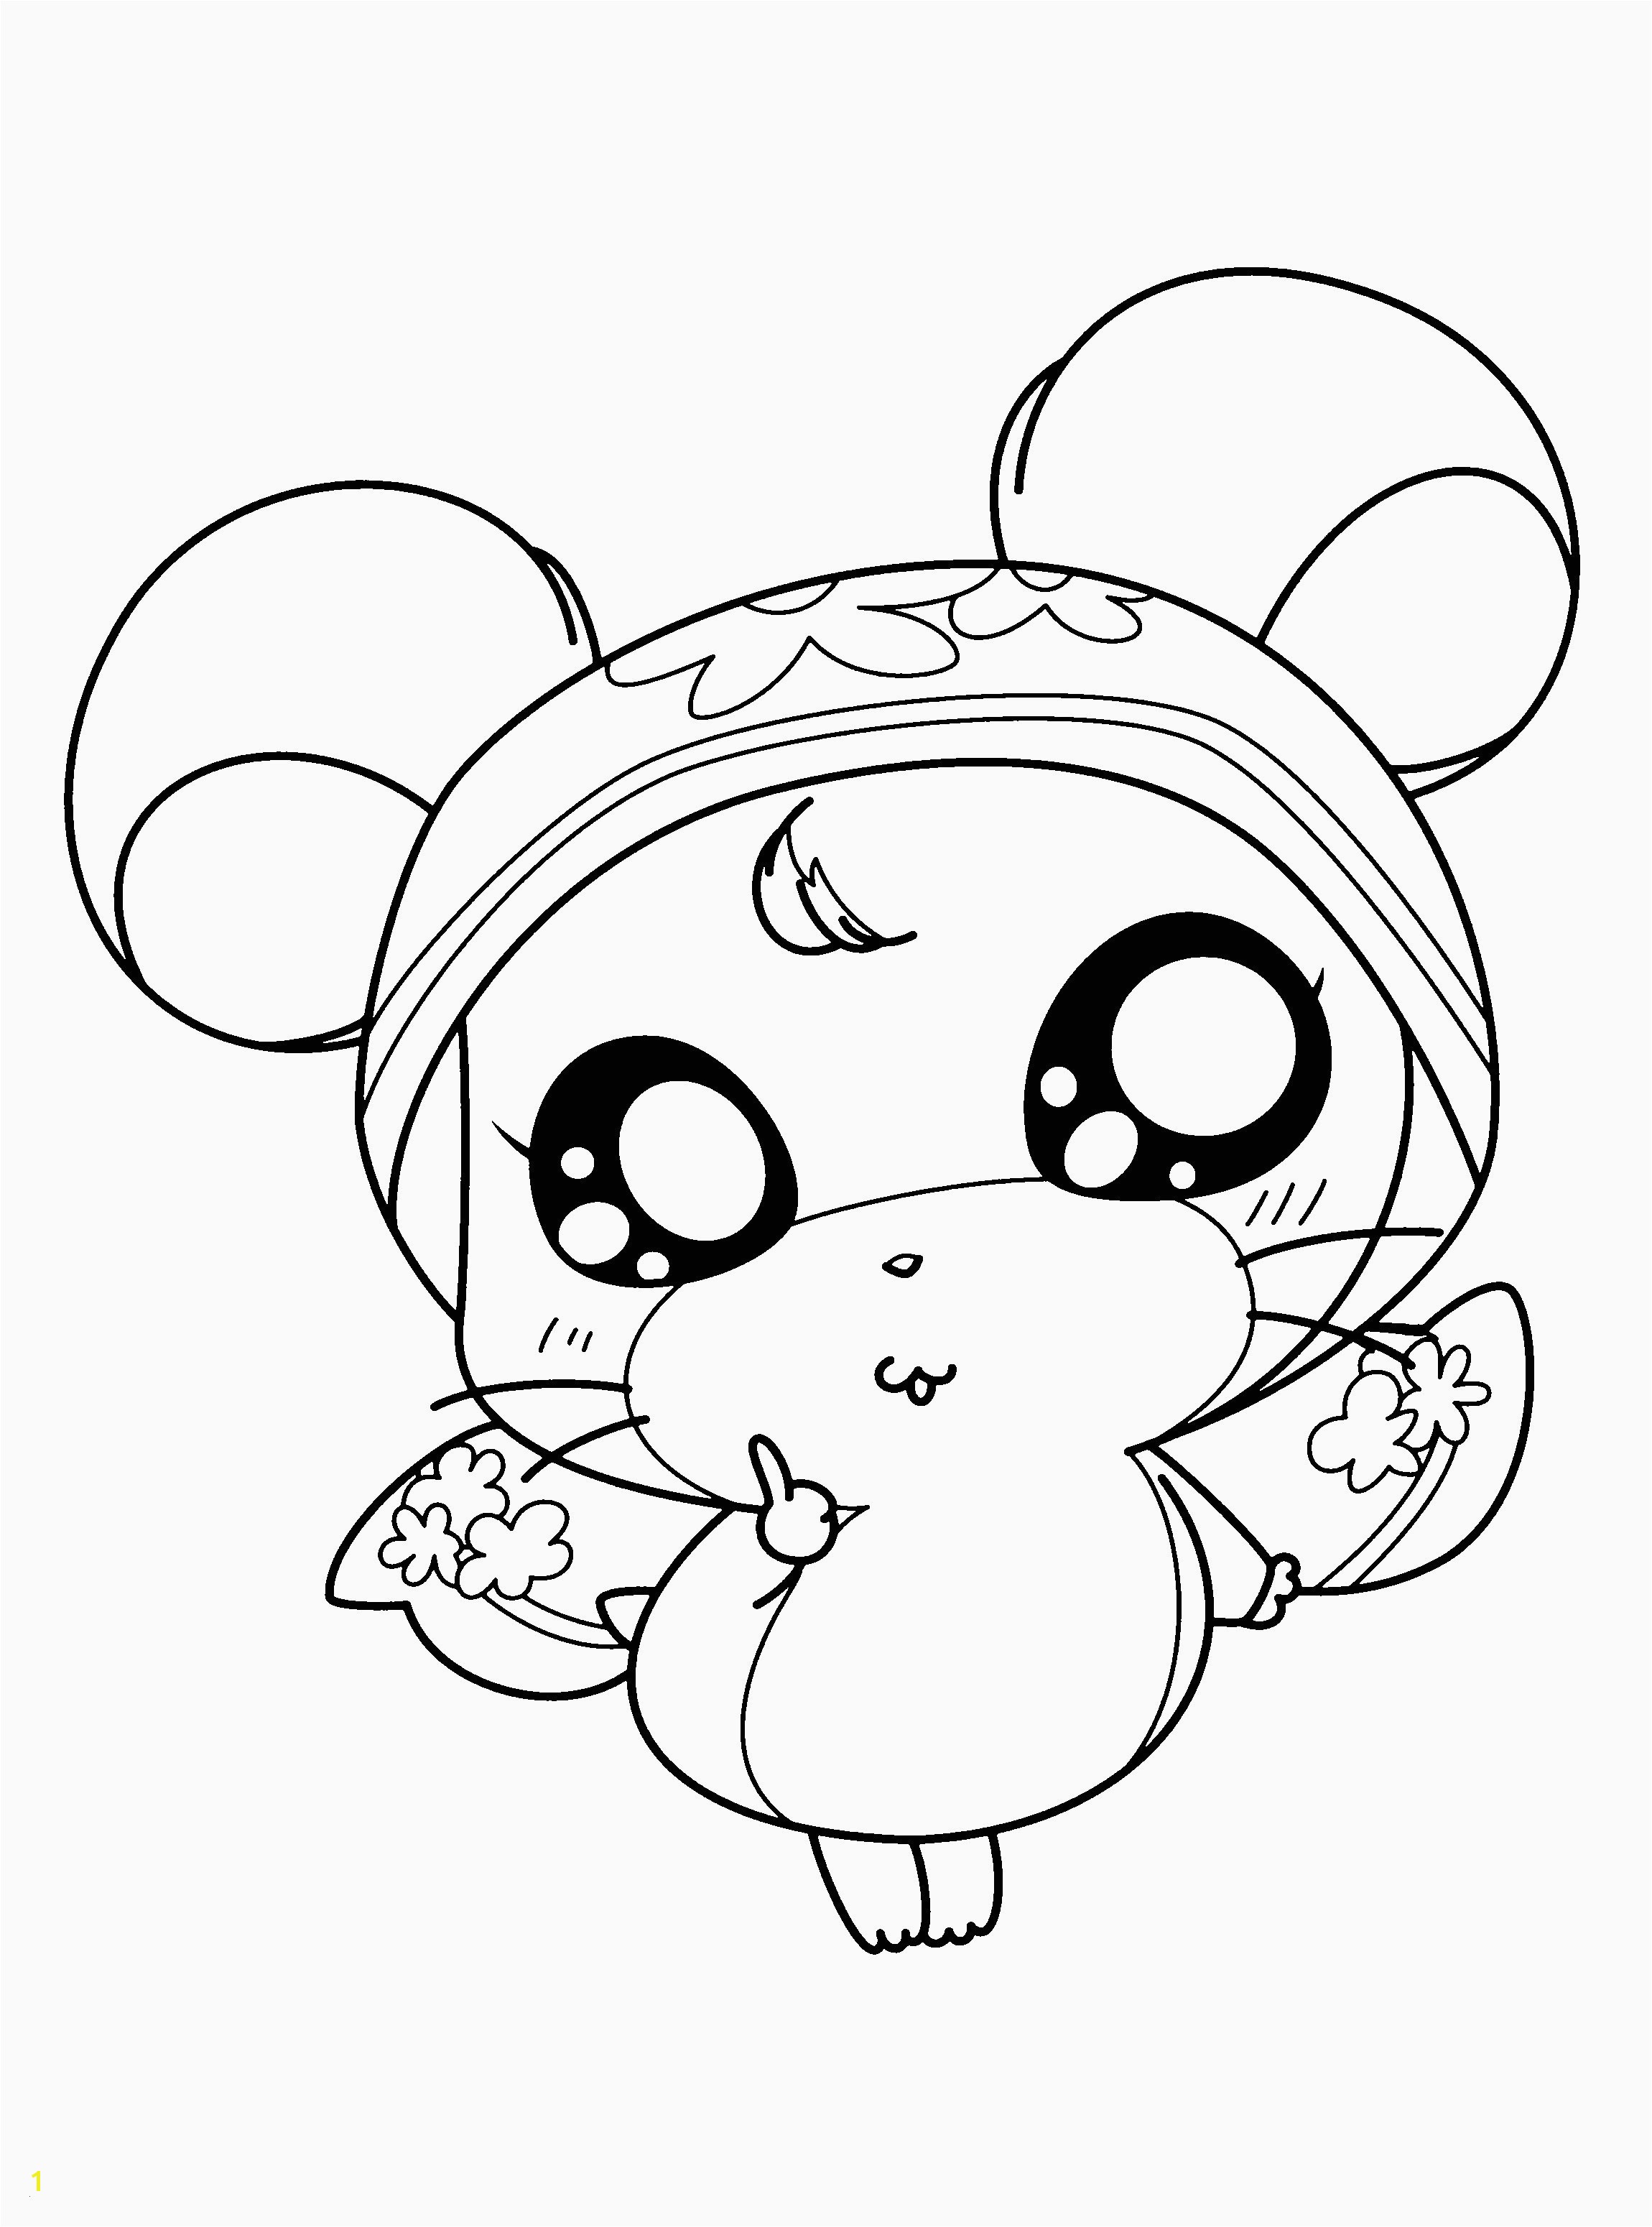 Coloring Pages Cute Baby Animals wallpaper details